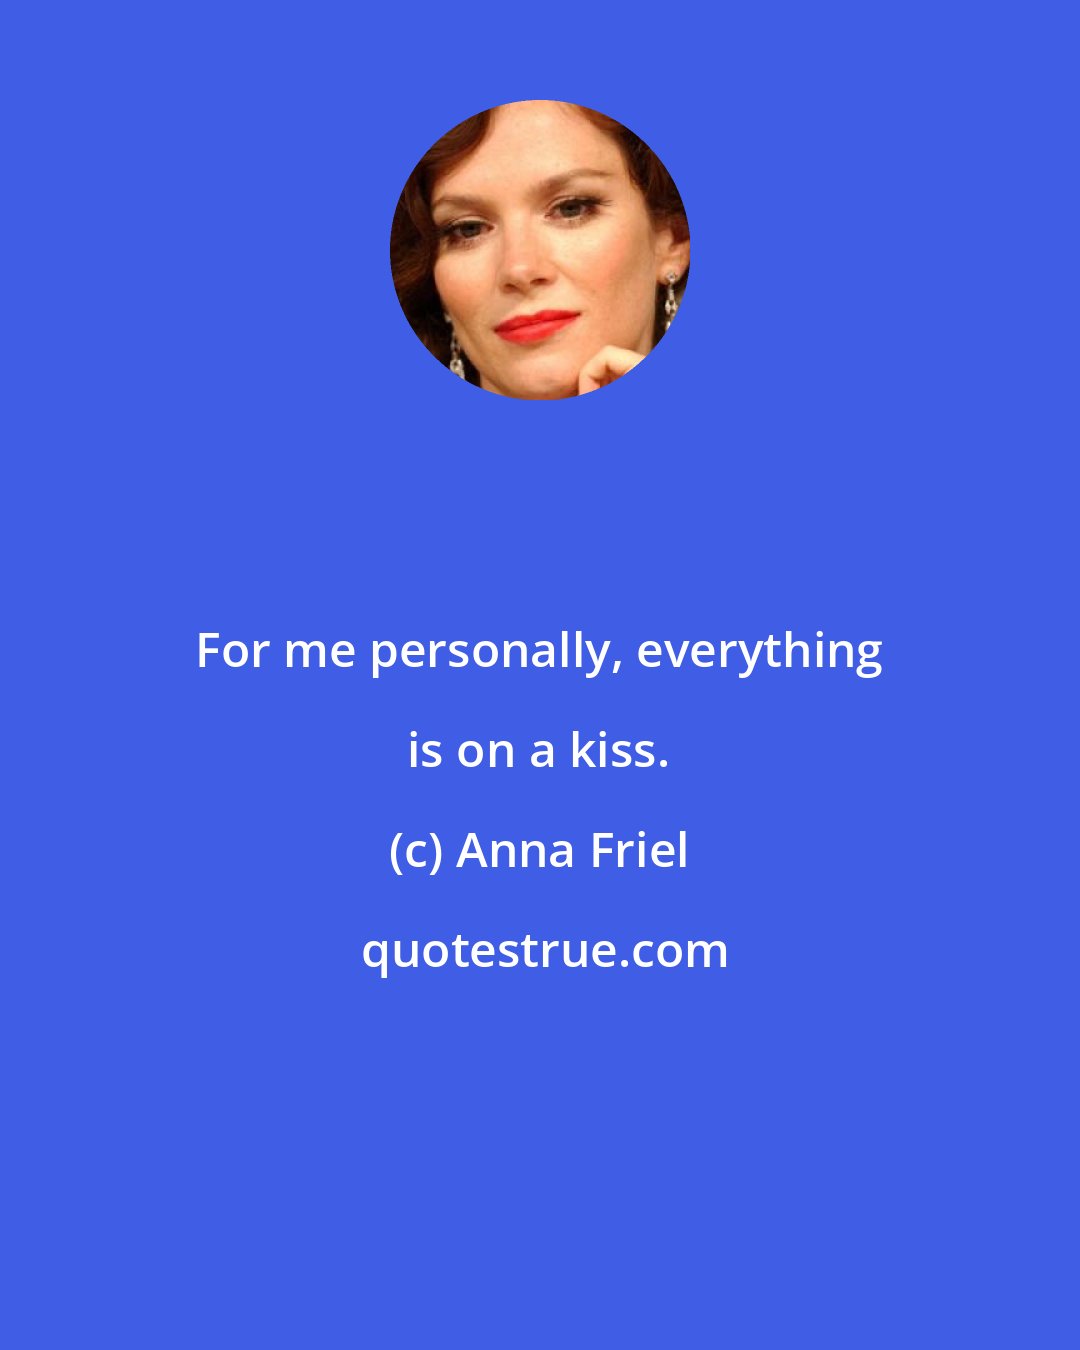 Anna Friel: For me personally, everything is on a kiss.